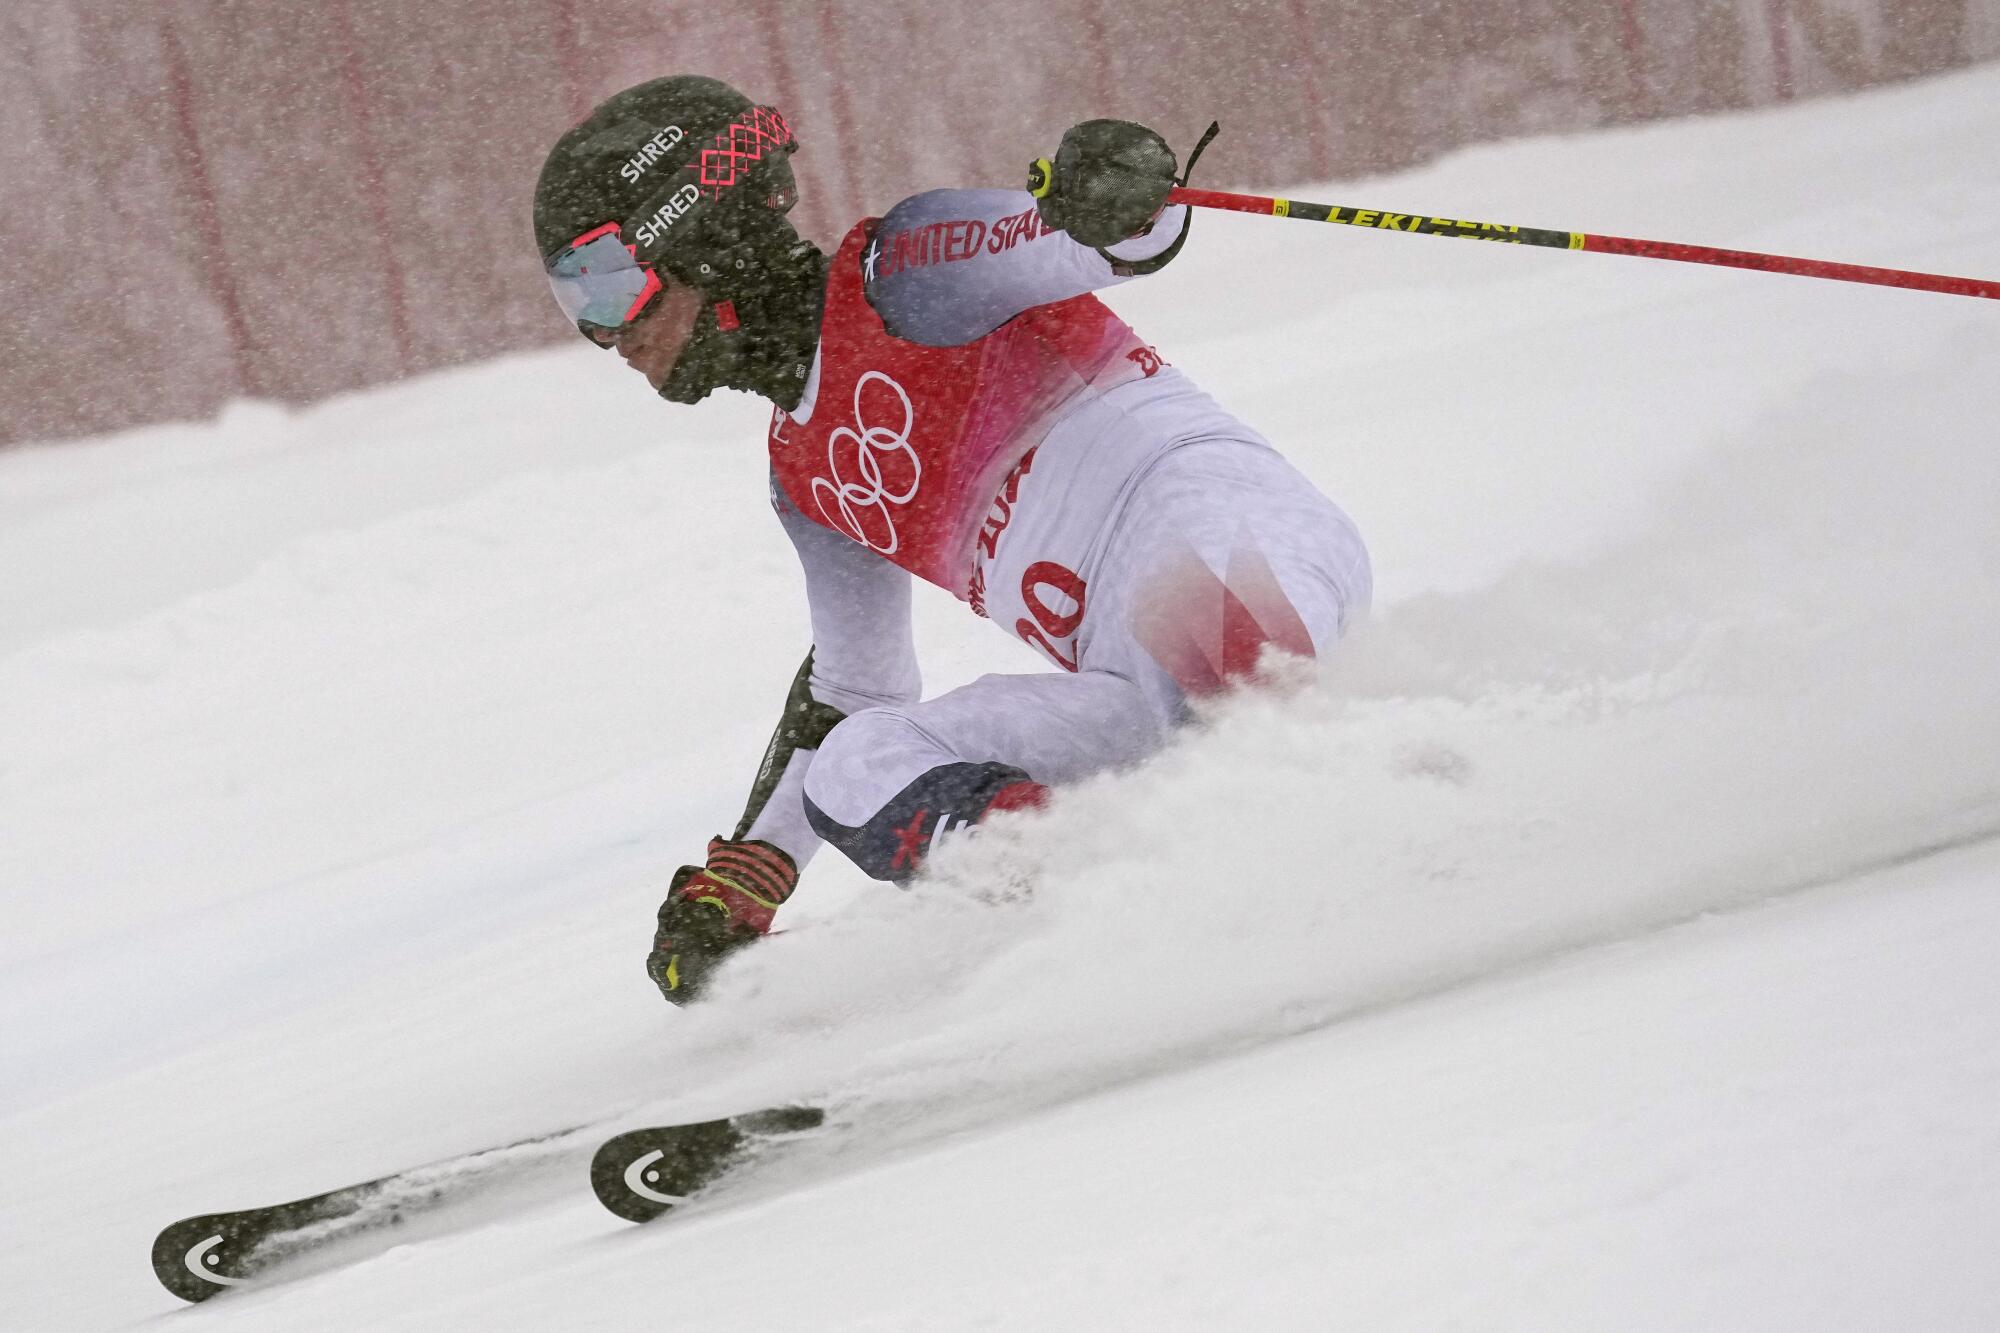 U.S. skier Tommy Ford takes part in the first run of the men's giant slalom at the 2022 Winter Olympics.